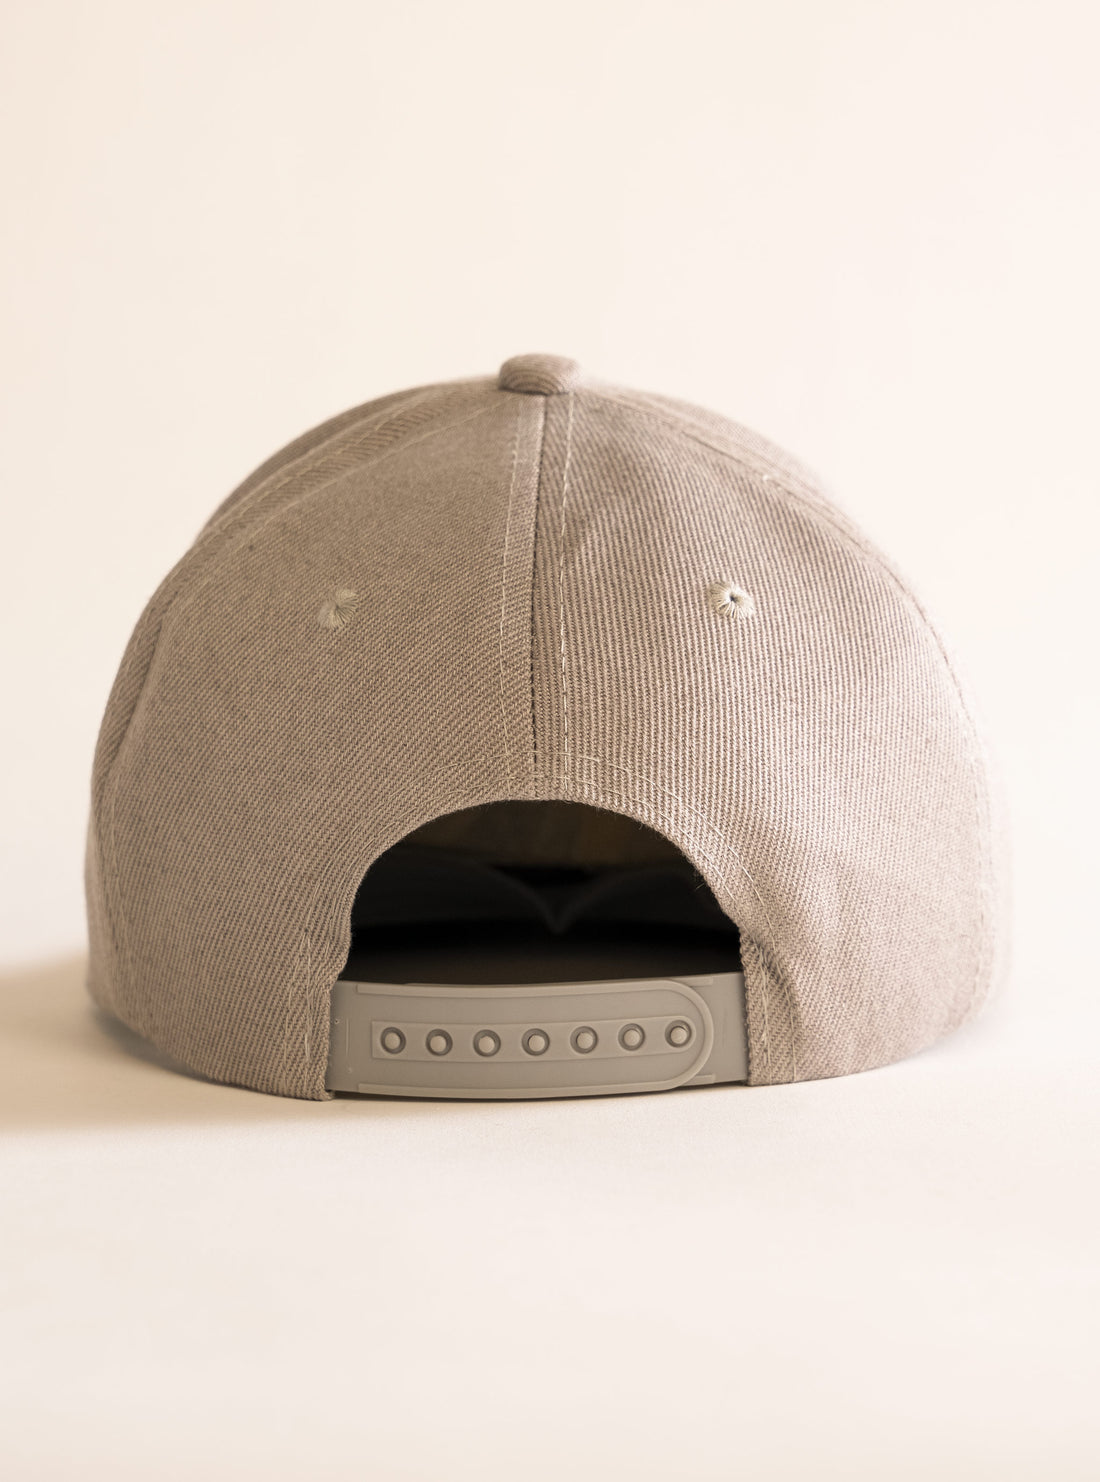 The Hard Way Snapback Gorra, Gris Obscuro